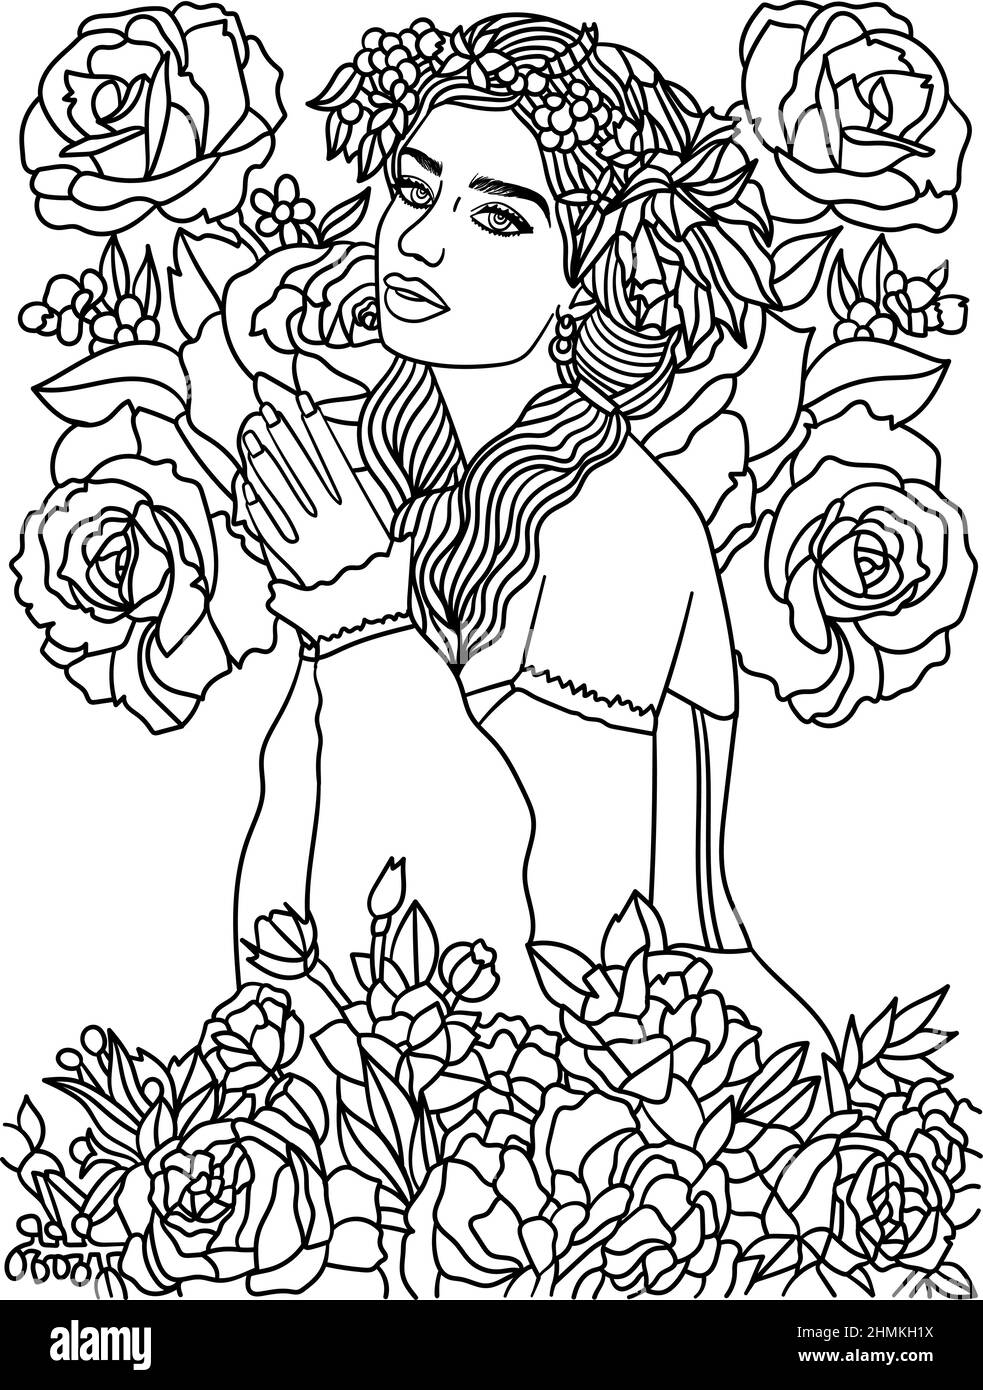 Flower Girl Coloring Page for Adults Stock Vector Image & Art   Alamy